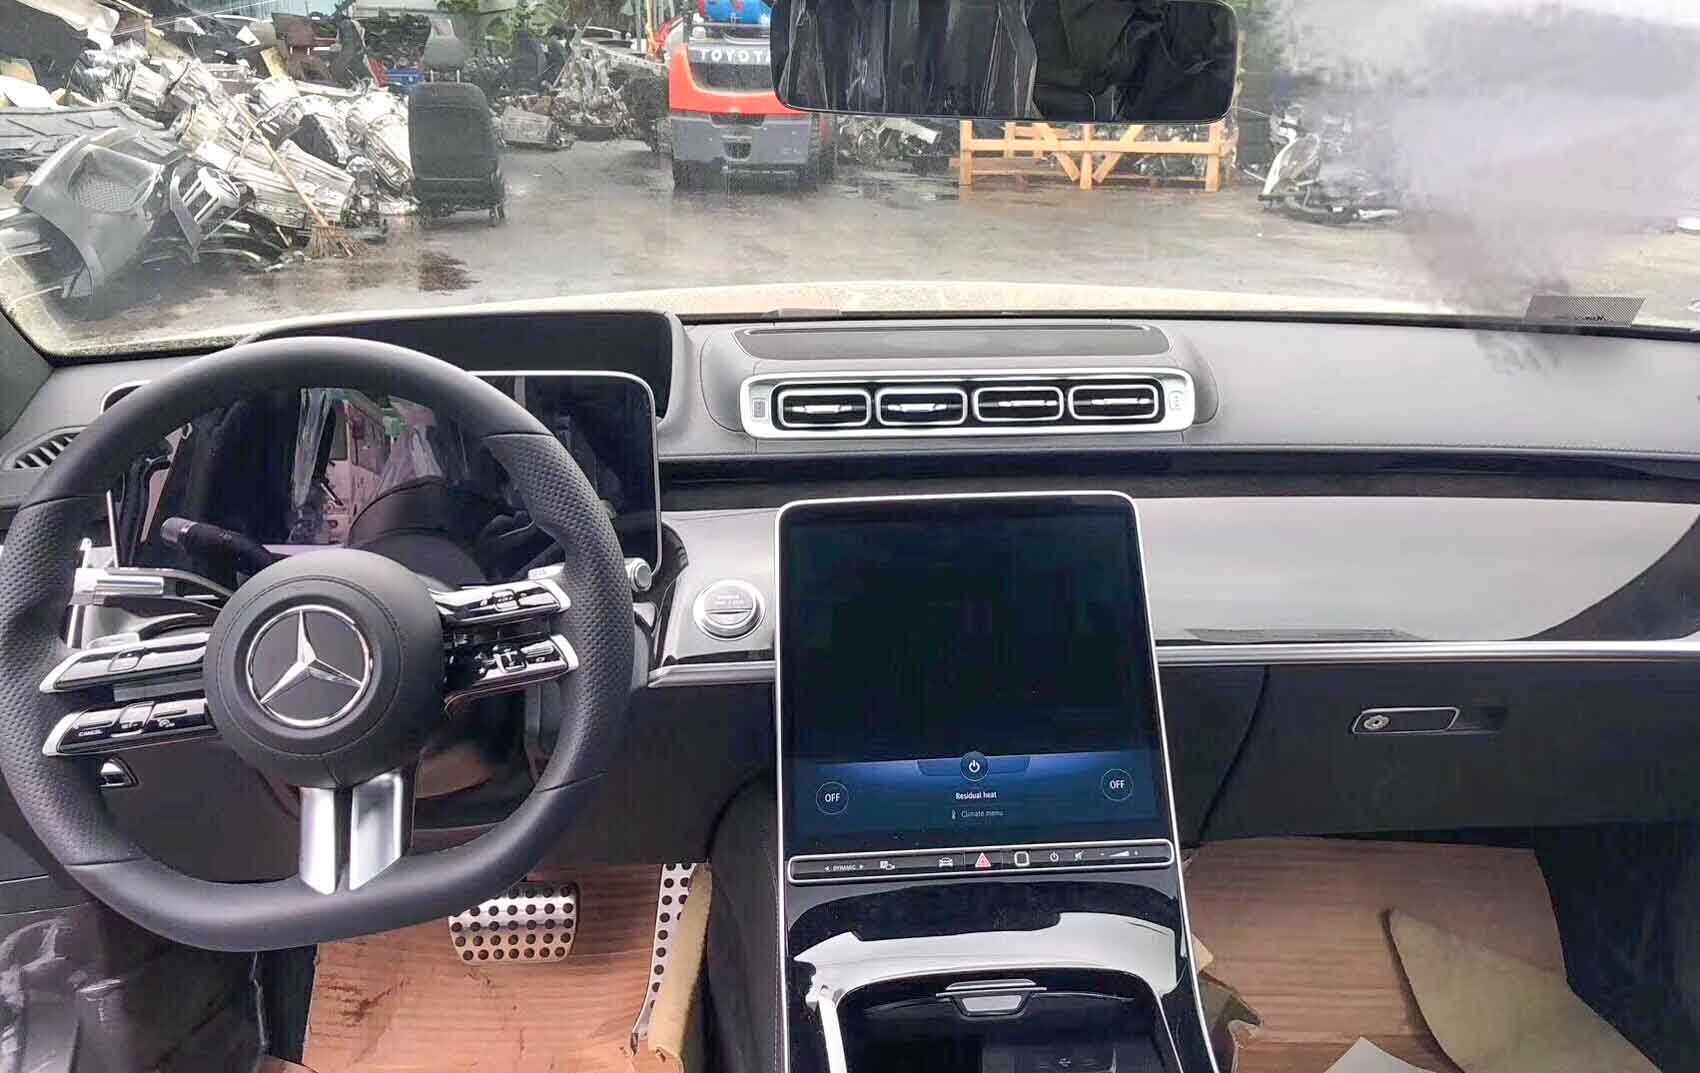 2021 Mercedes-Benz S-Class Pics Leaked Ahead Of Debut